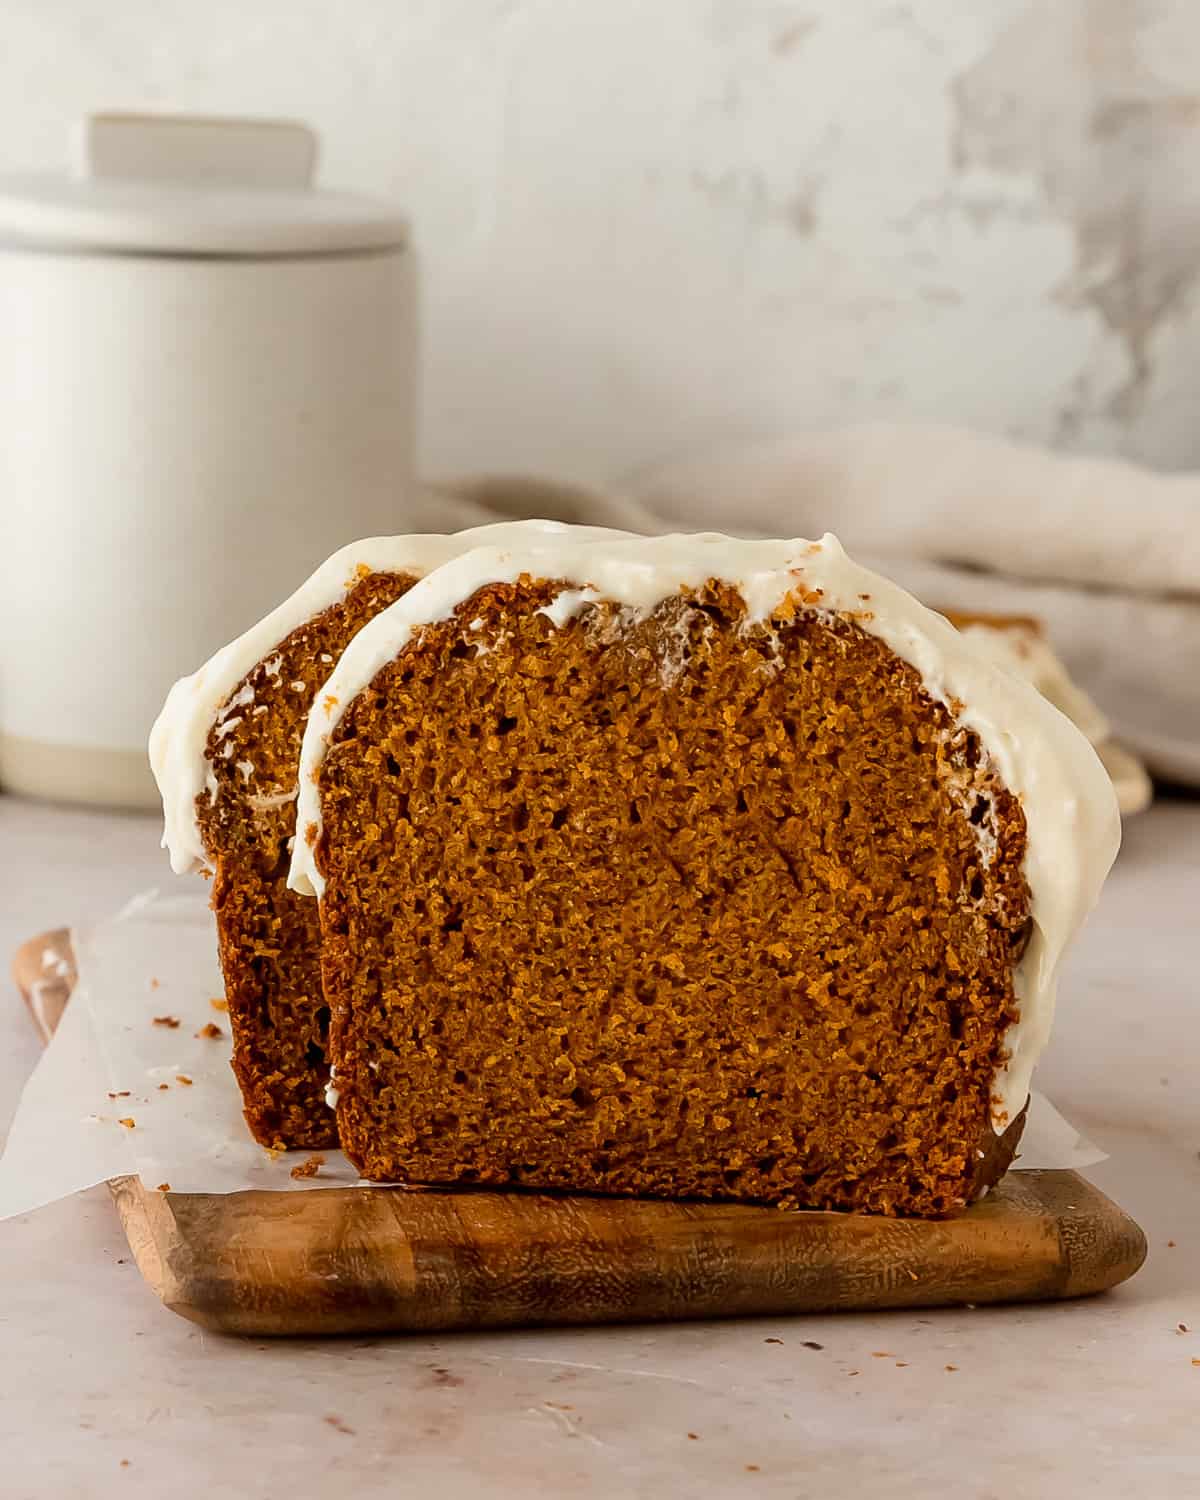 Pumpkin Bread with Cream Cheese Frosting with icing dripping down the side.